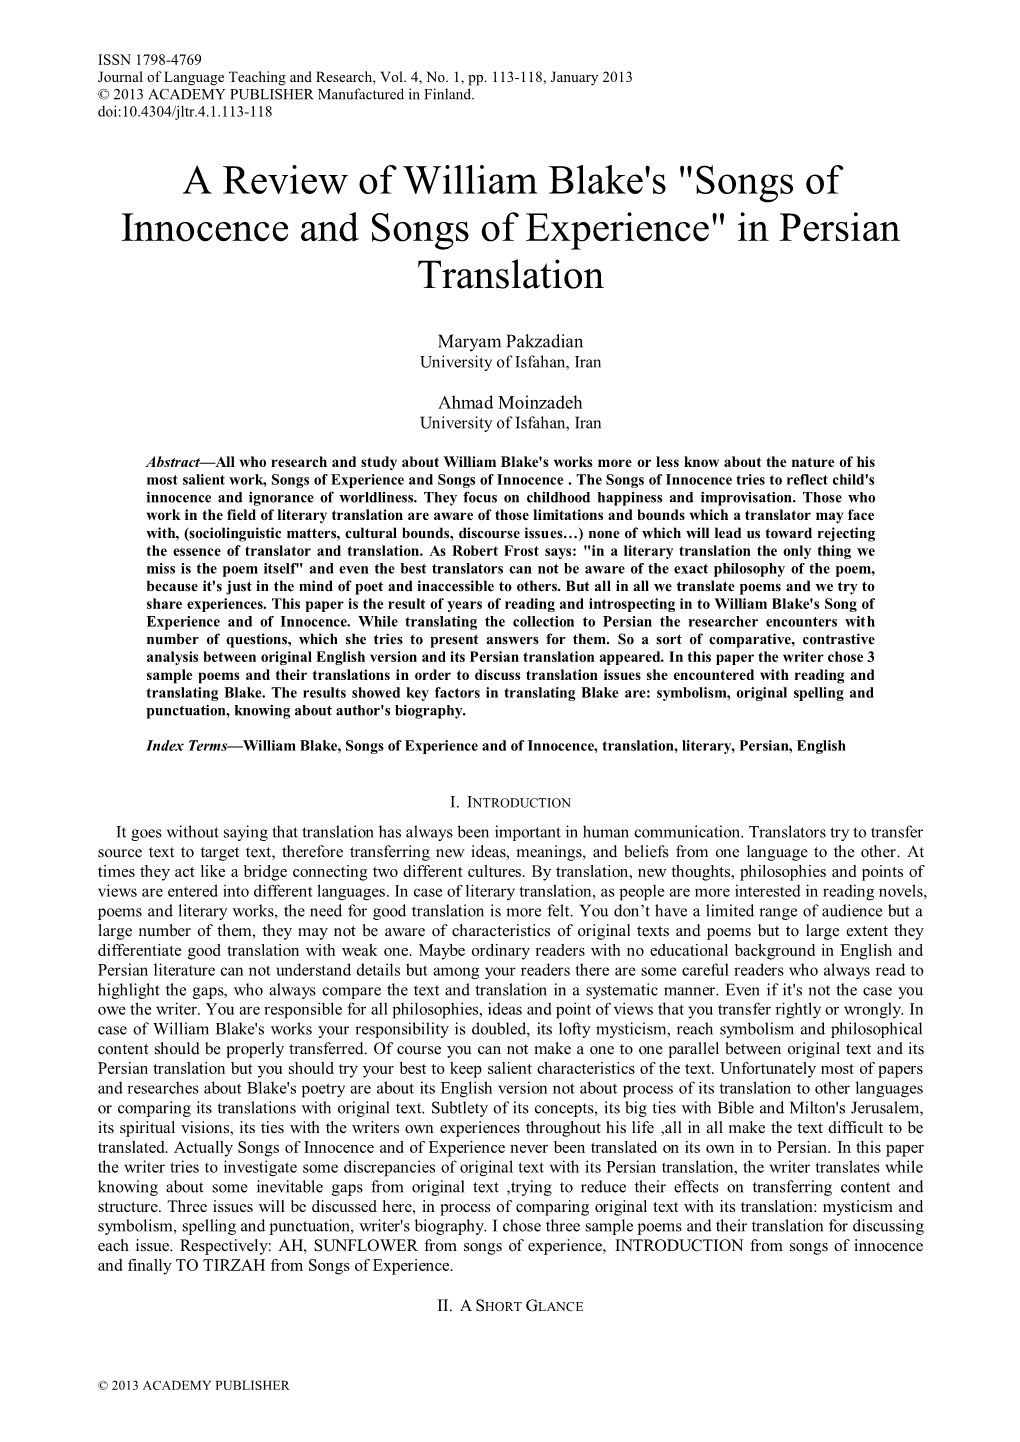 "Songs of Innocence and Songs of Experience" in Persian Translation